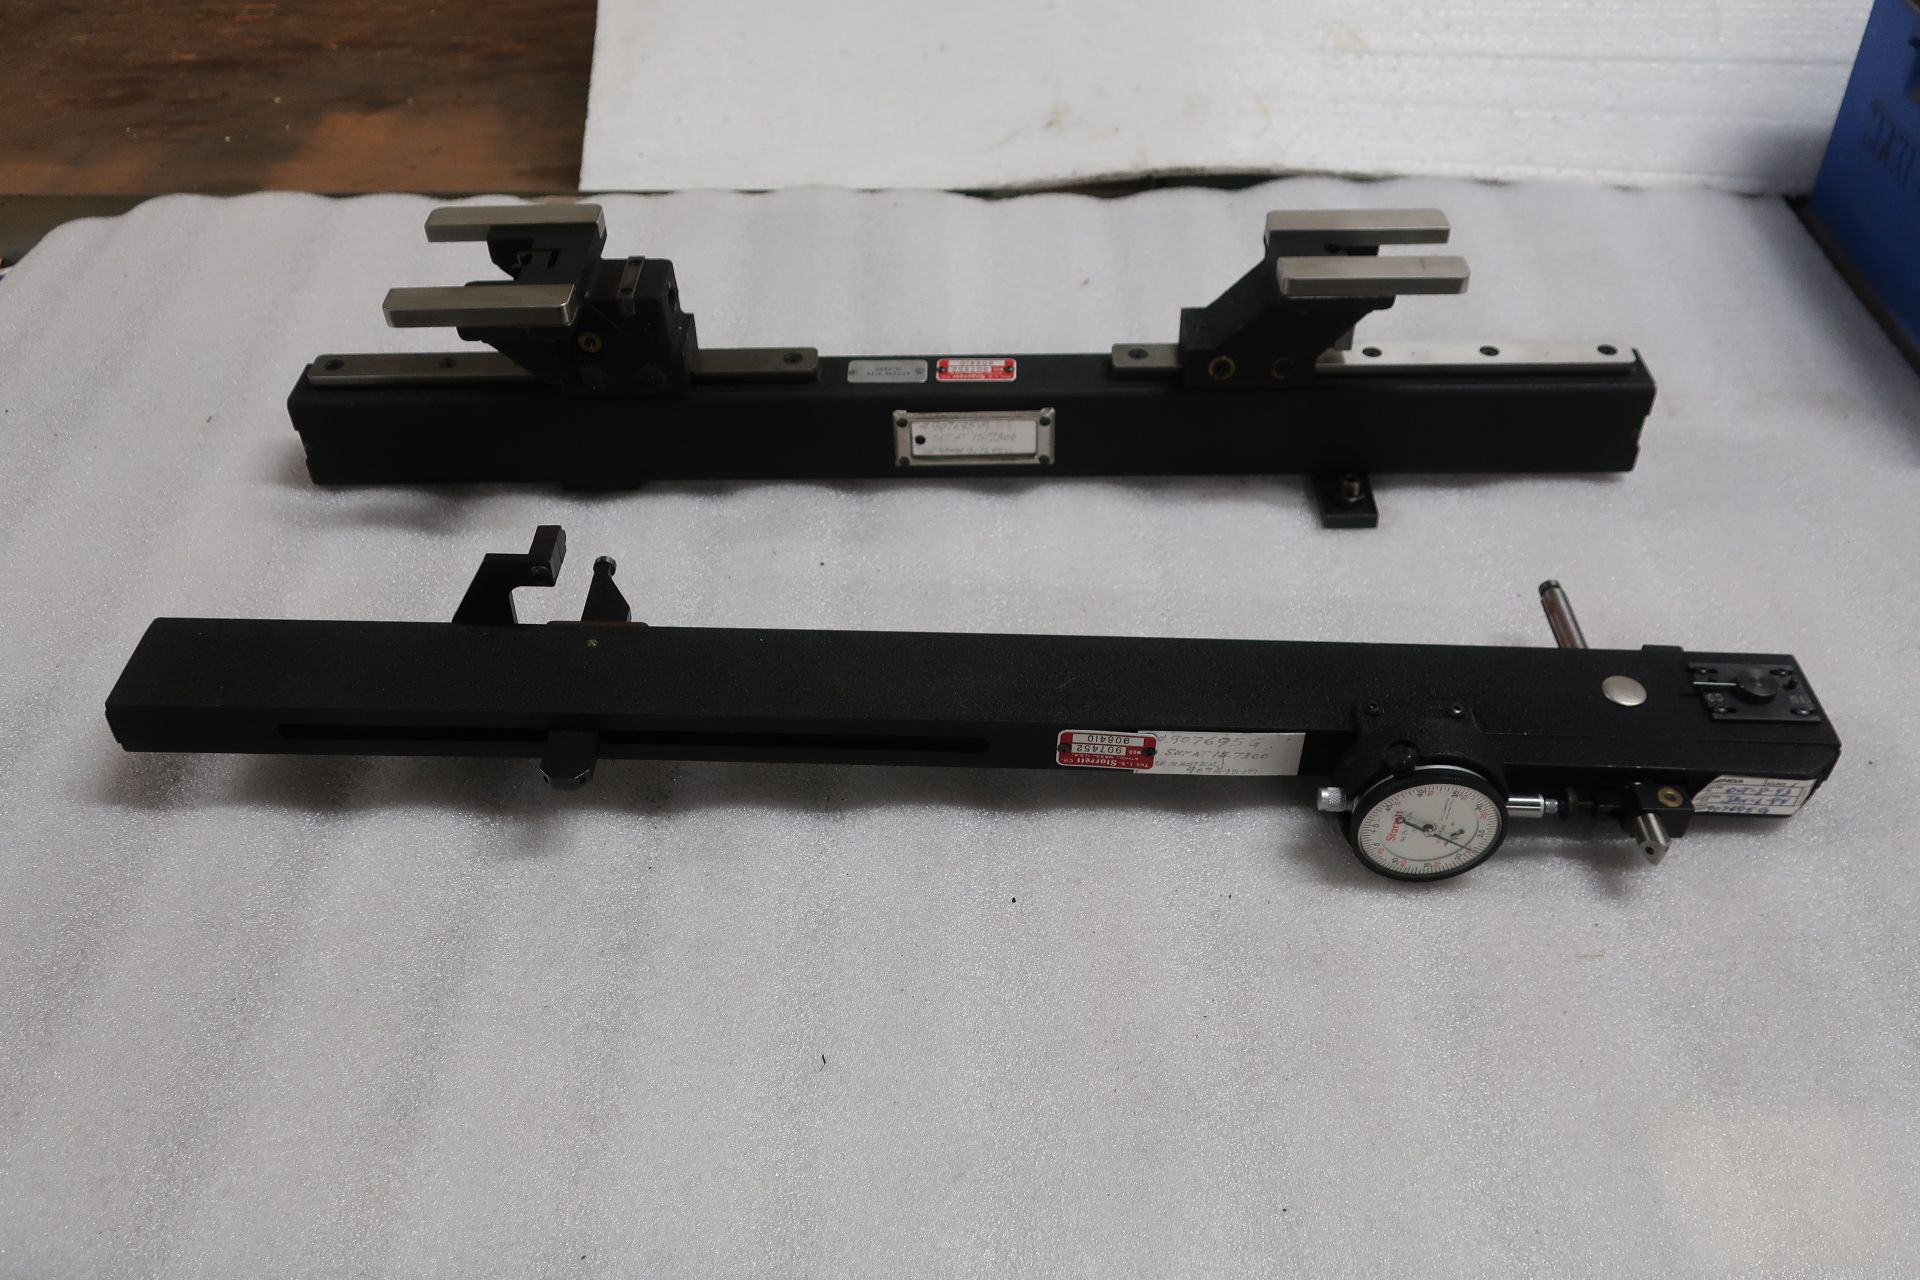 Deltronic Cutting Tool Inspection Turntable model 7354 - Image 2 of 3